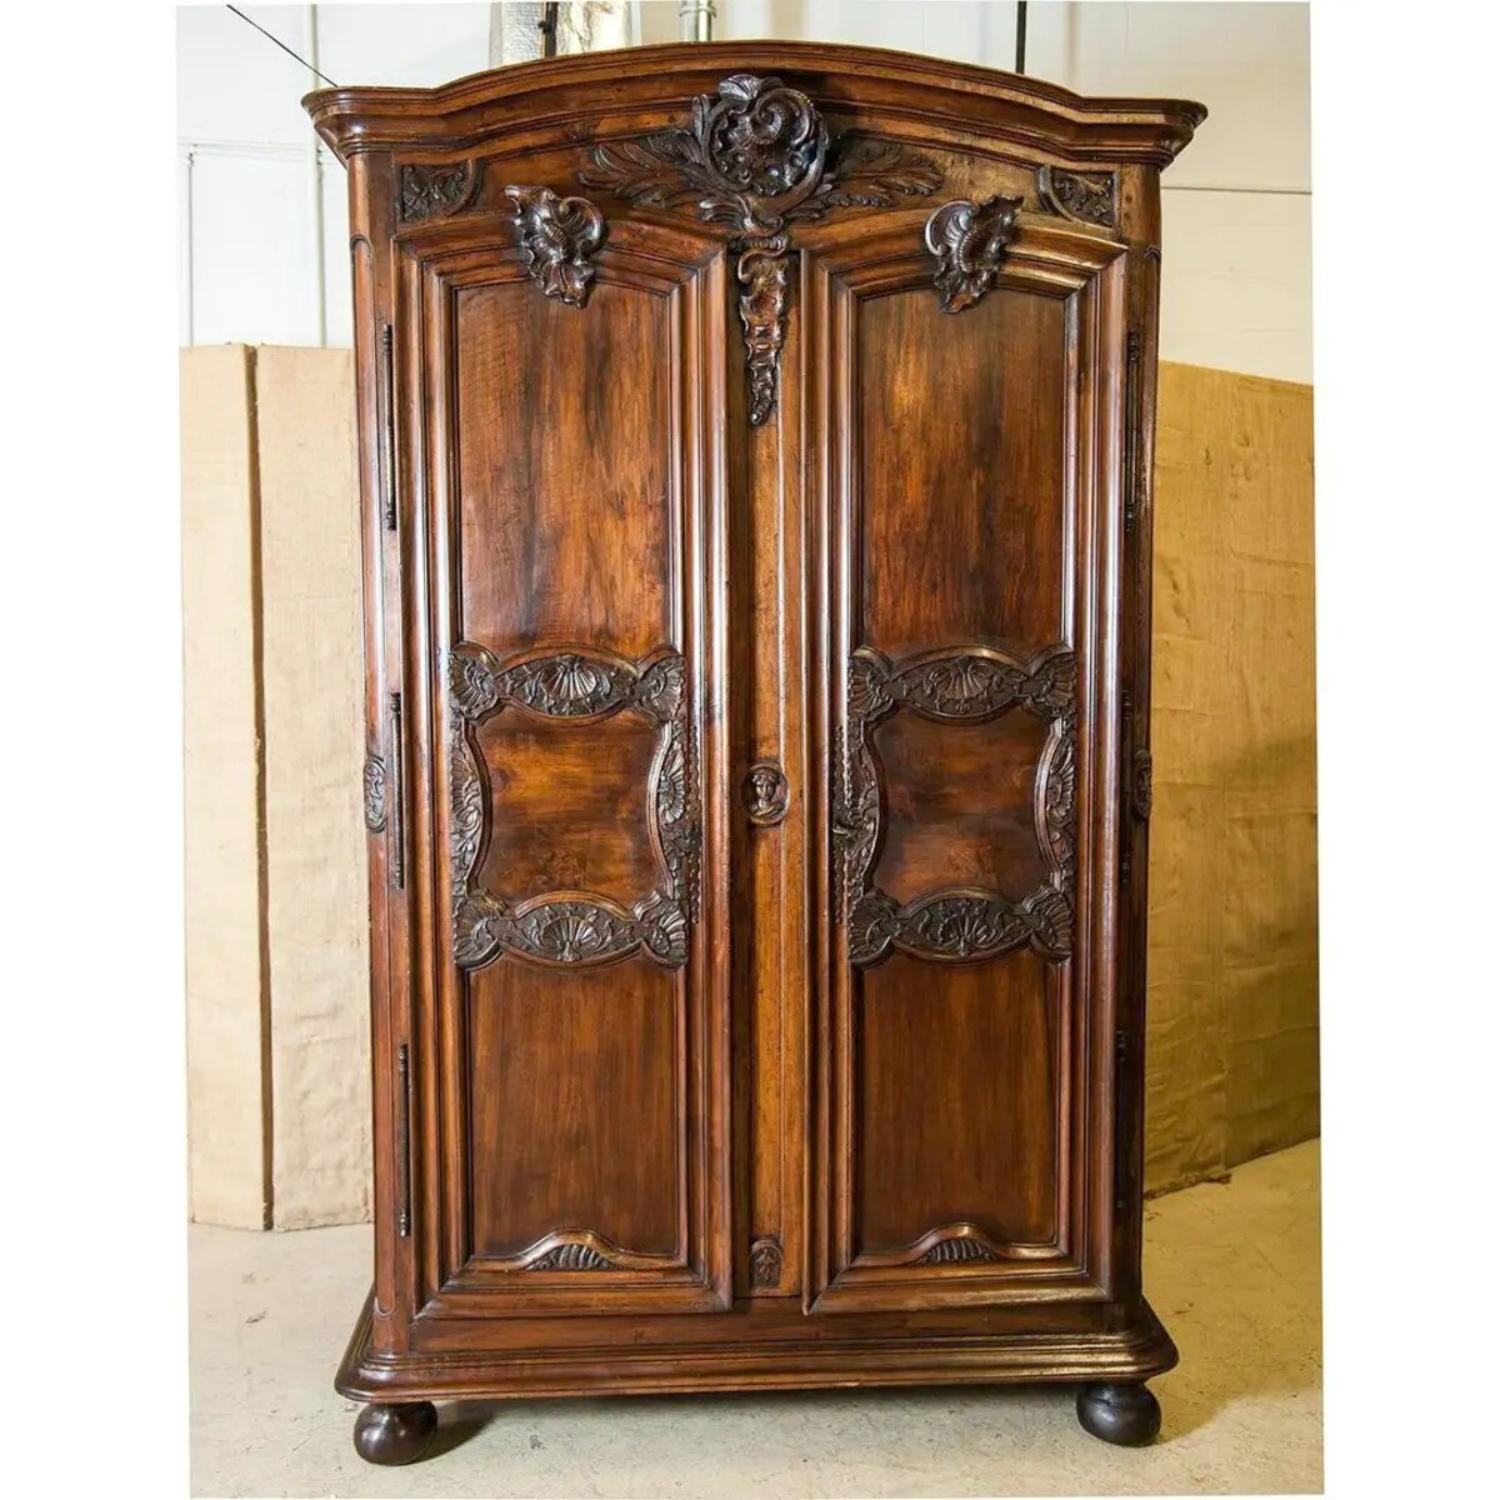 A monumental 18th century French Régence period chateau armoire handcrafted of solid walnut by talented artisans in Lyon, circa 1720, having a chapeau de gendarme crown atop an intricately hand carved frieze adorned with beautifully carved rocaille